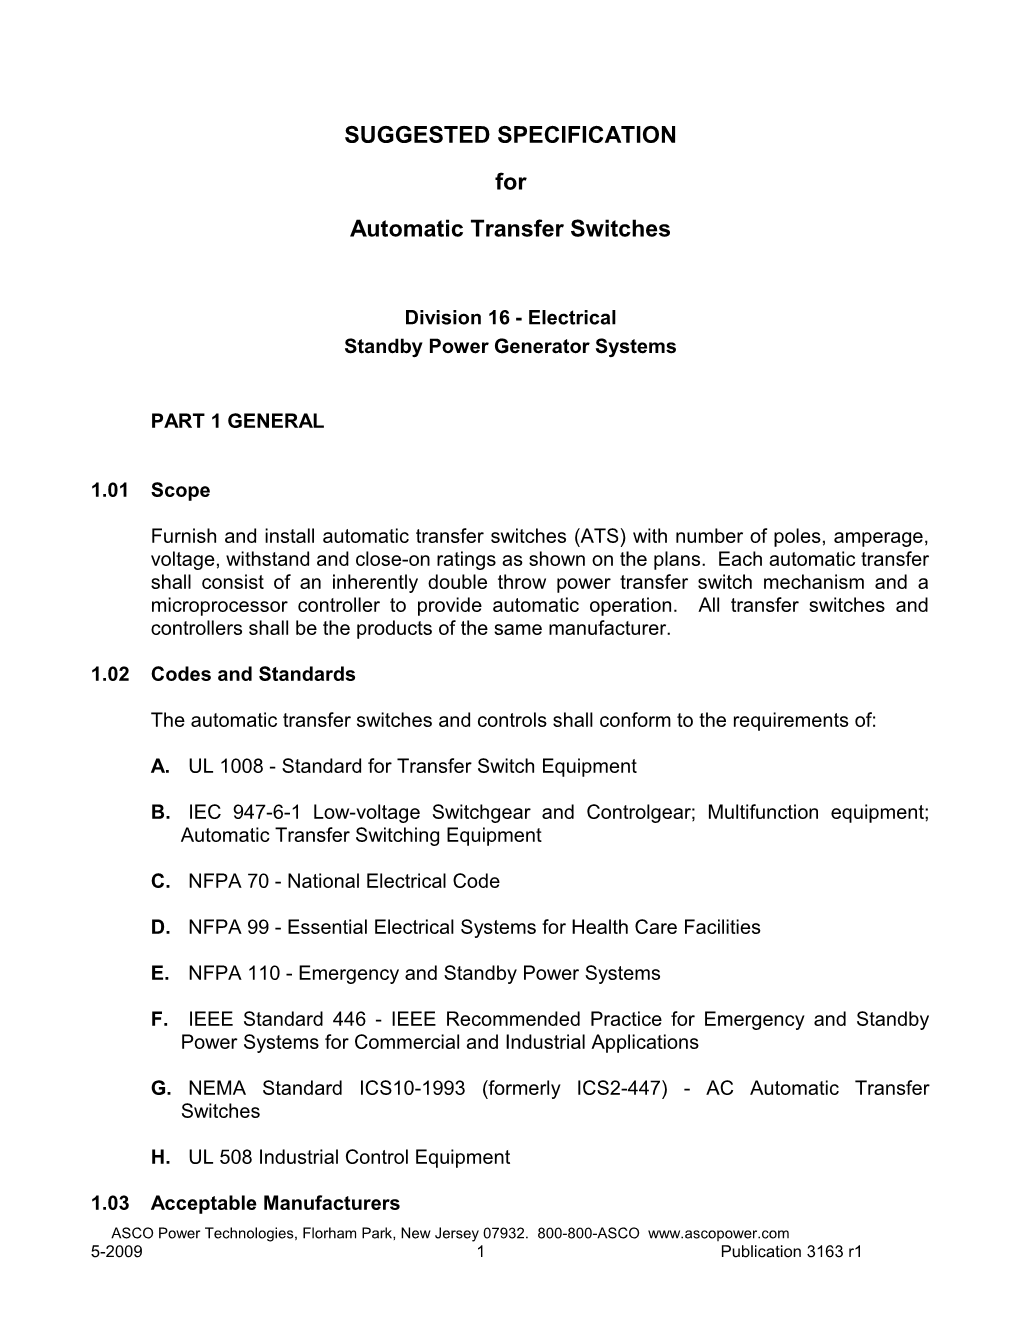 ASCO 4000 SUGGESTED SPECIFICATION for Automatic Transfer Switches (Pub 3163)